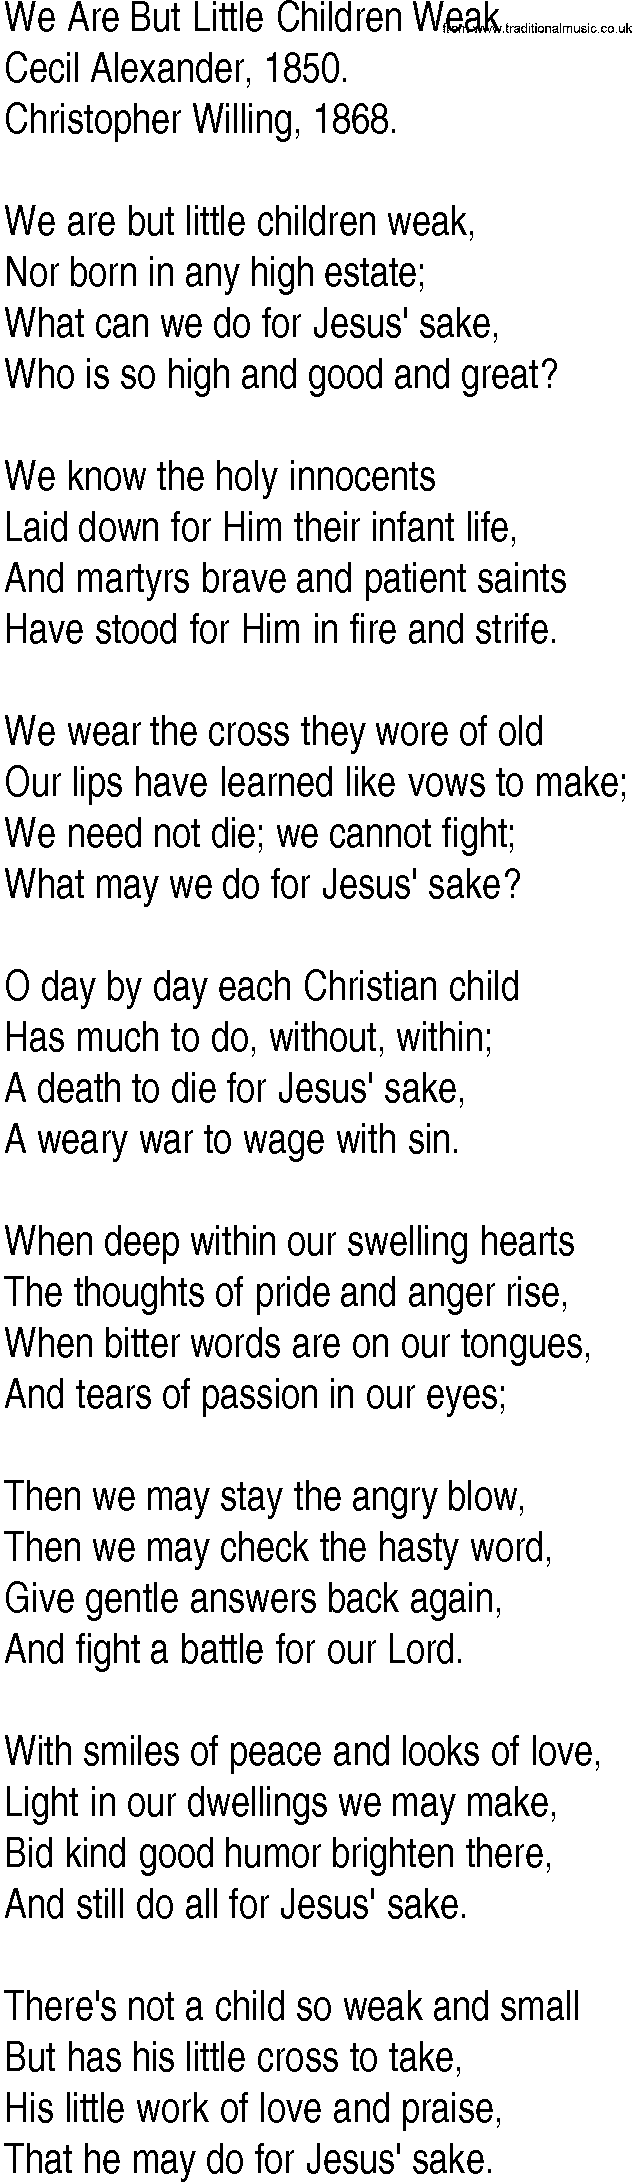 Hymn and Gospel Song: We Are But Little Children Weak by Cecil Alexander lyrics